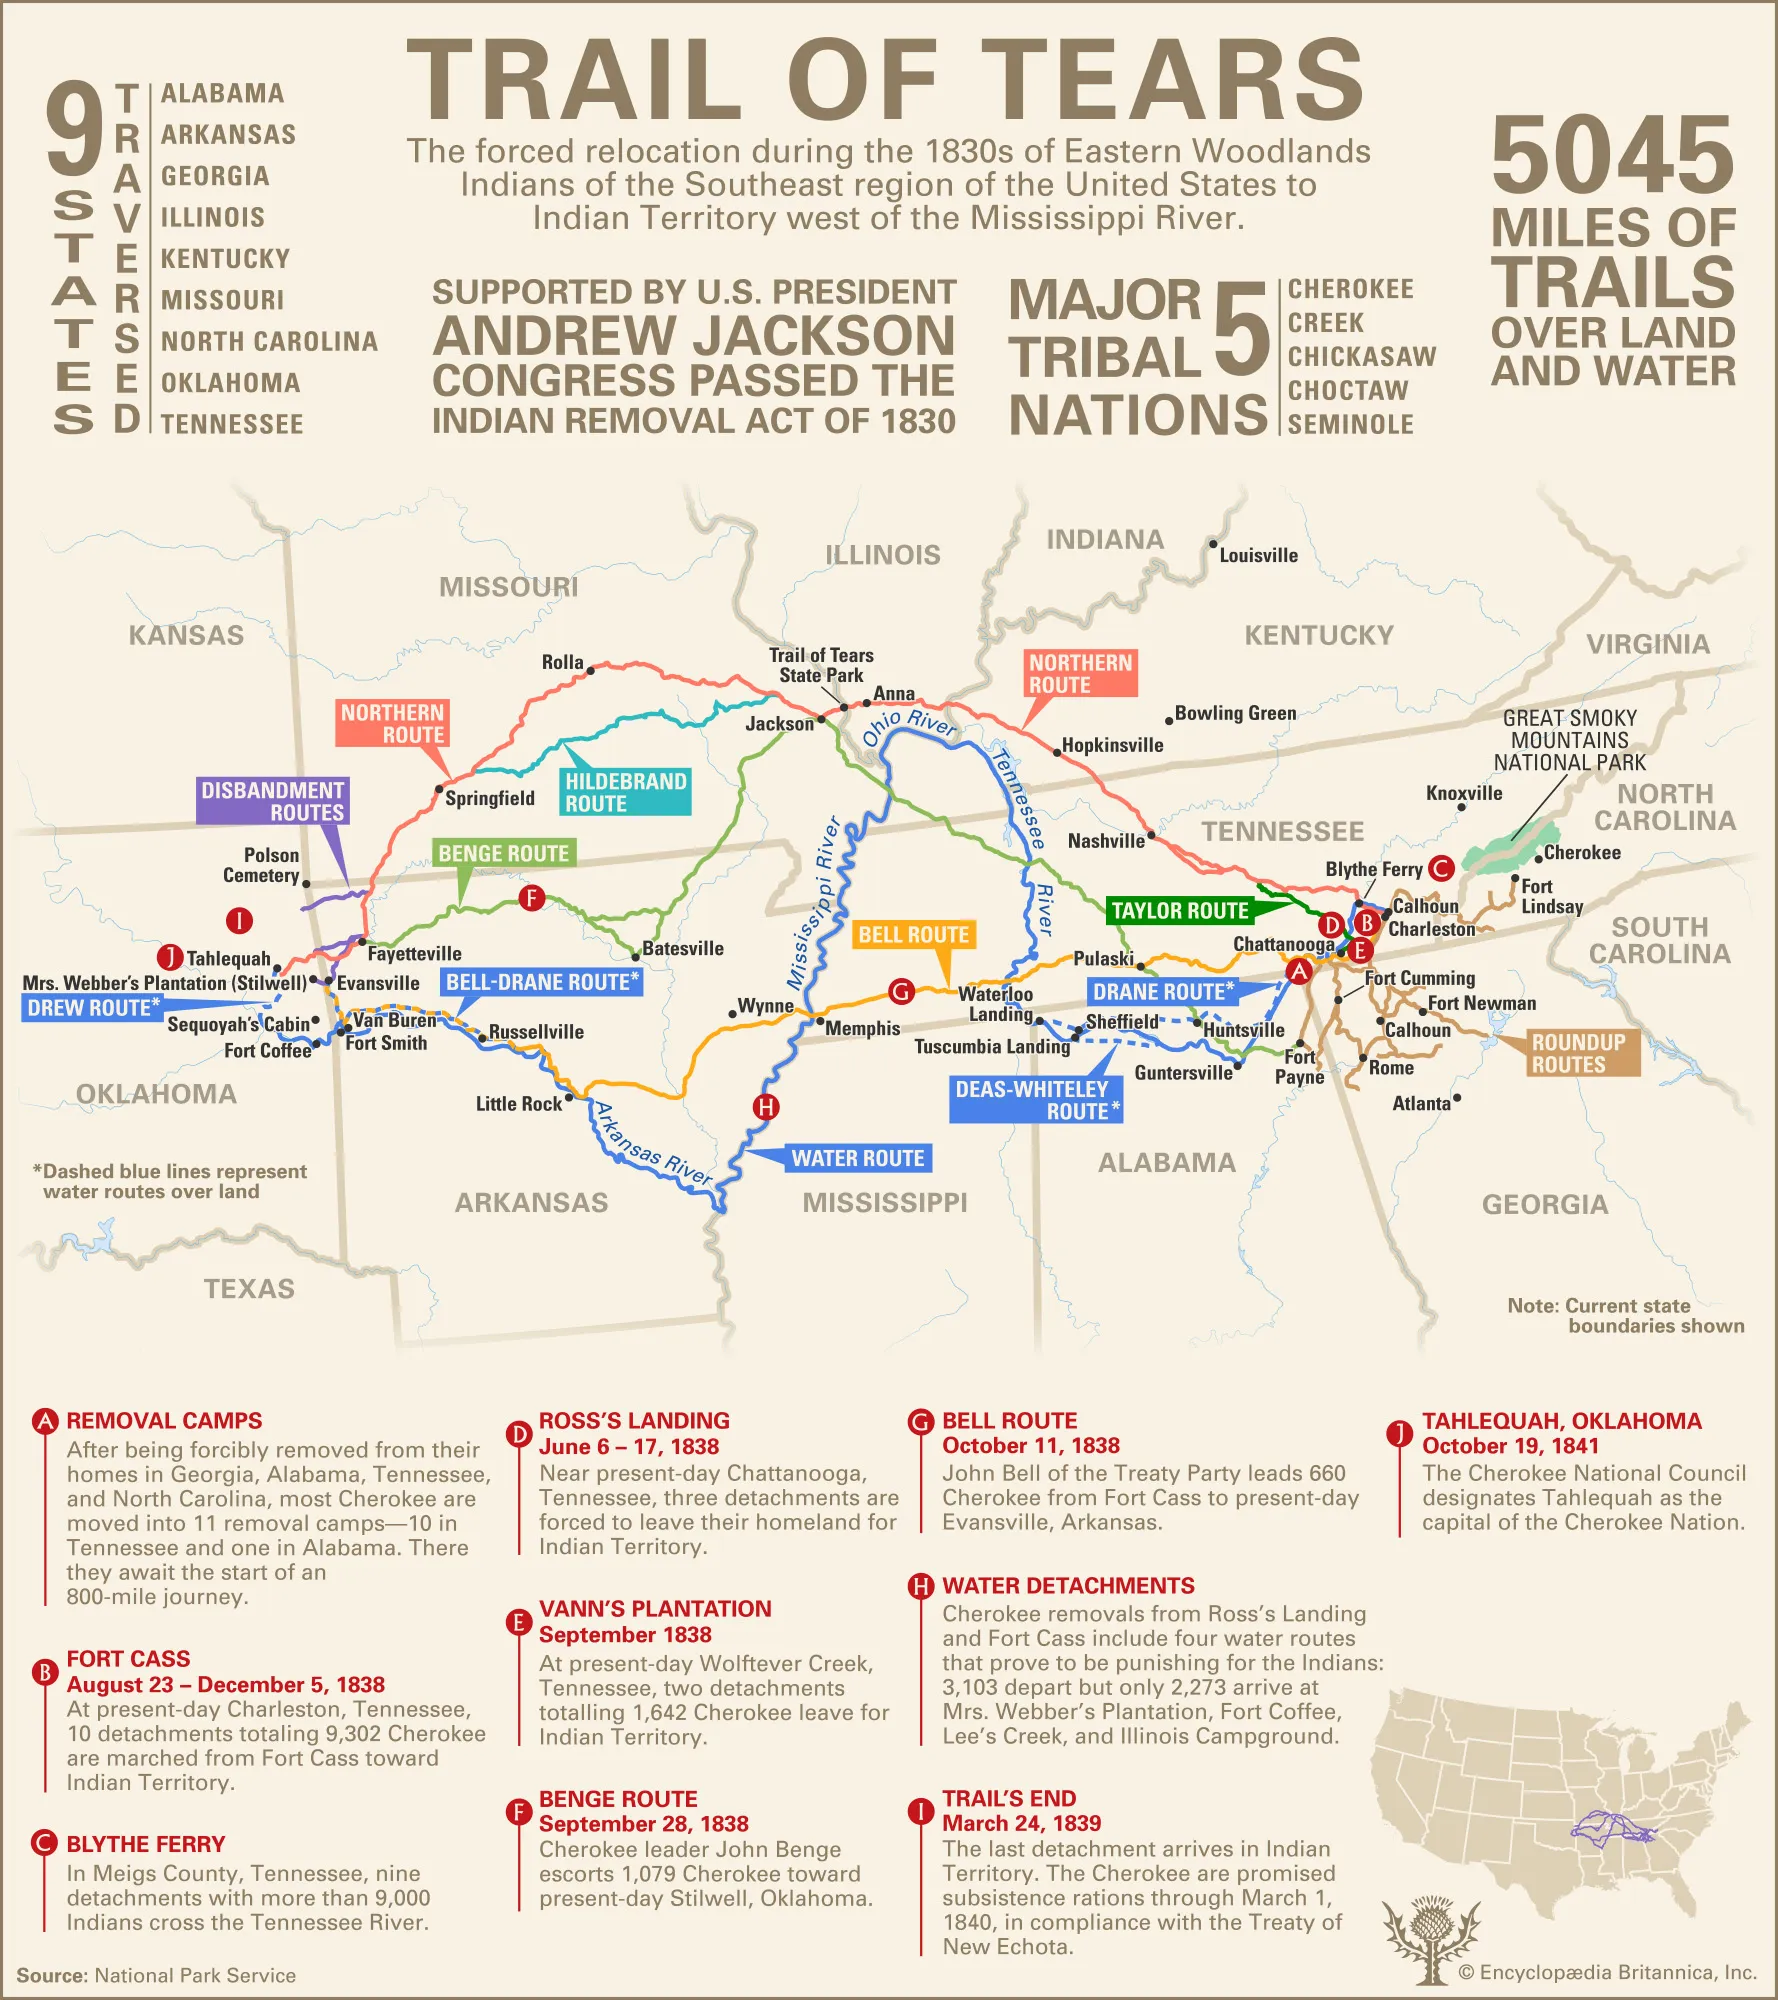 Trail of Tears Routes | Statistical Information